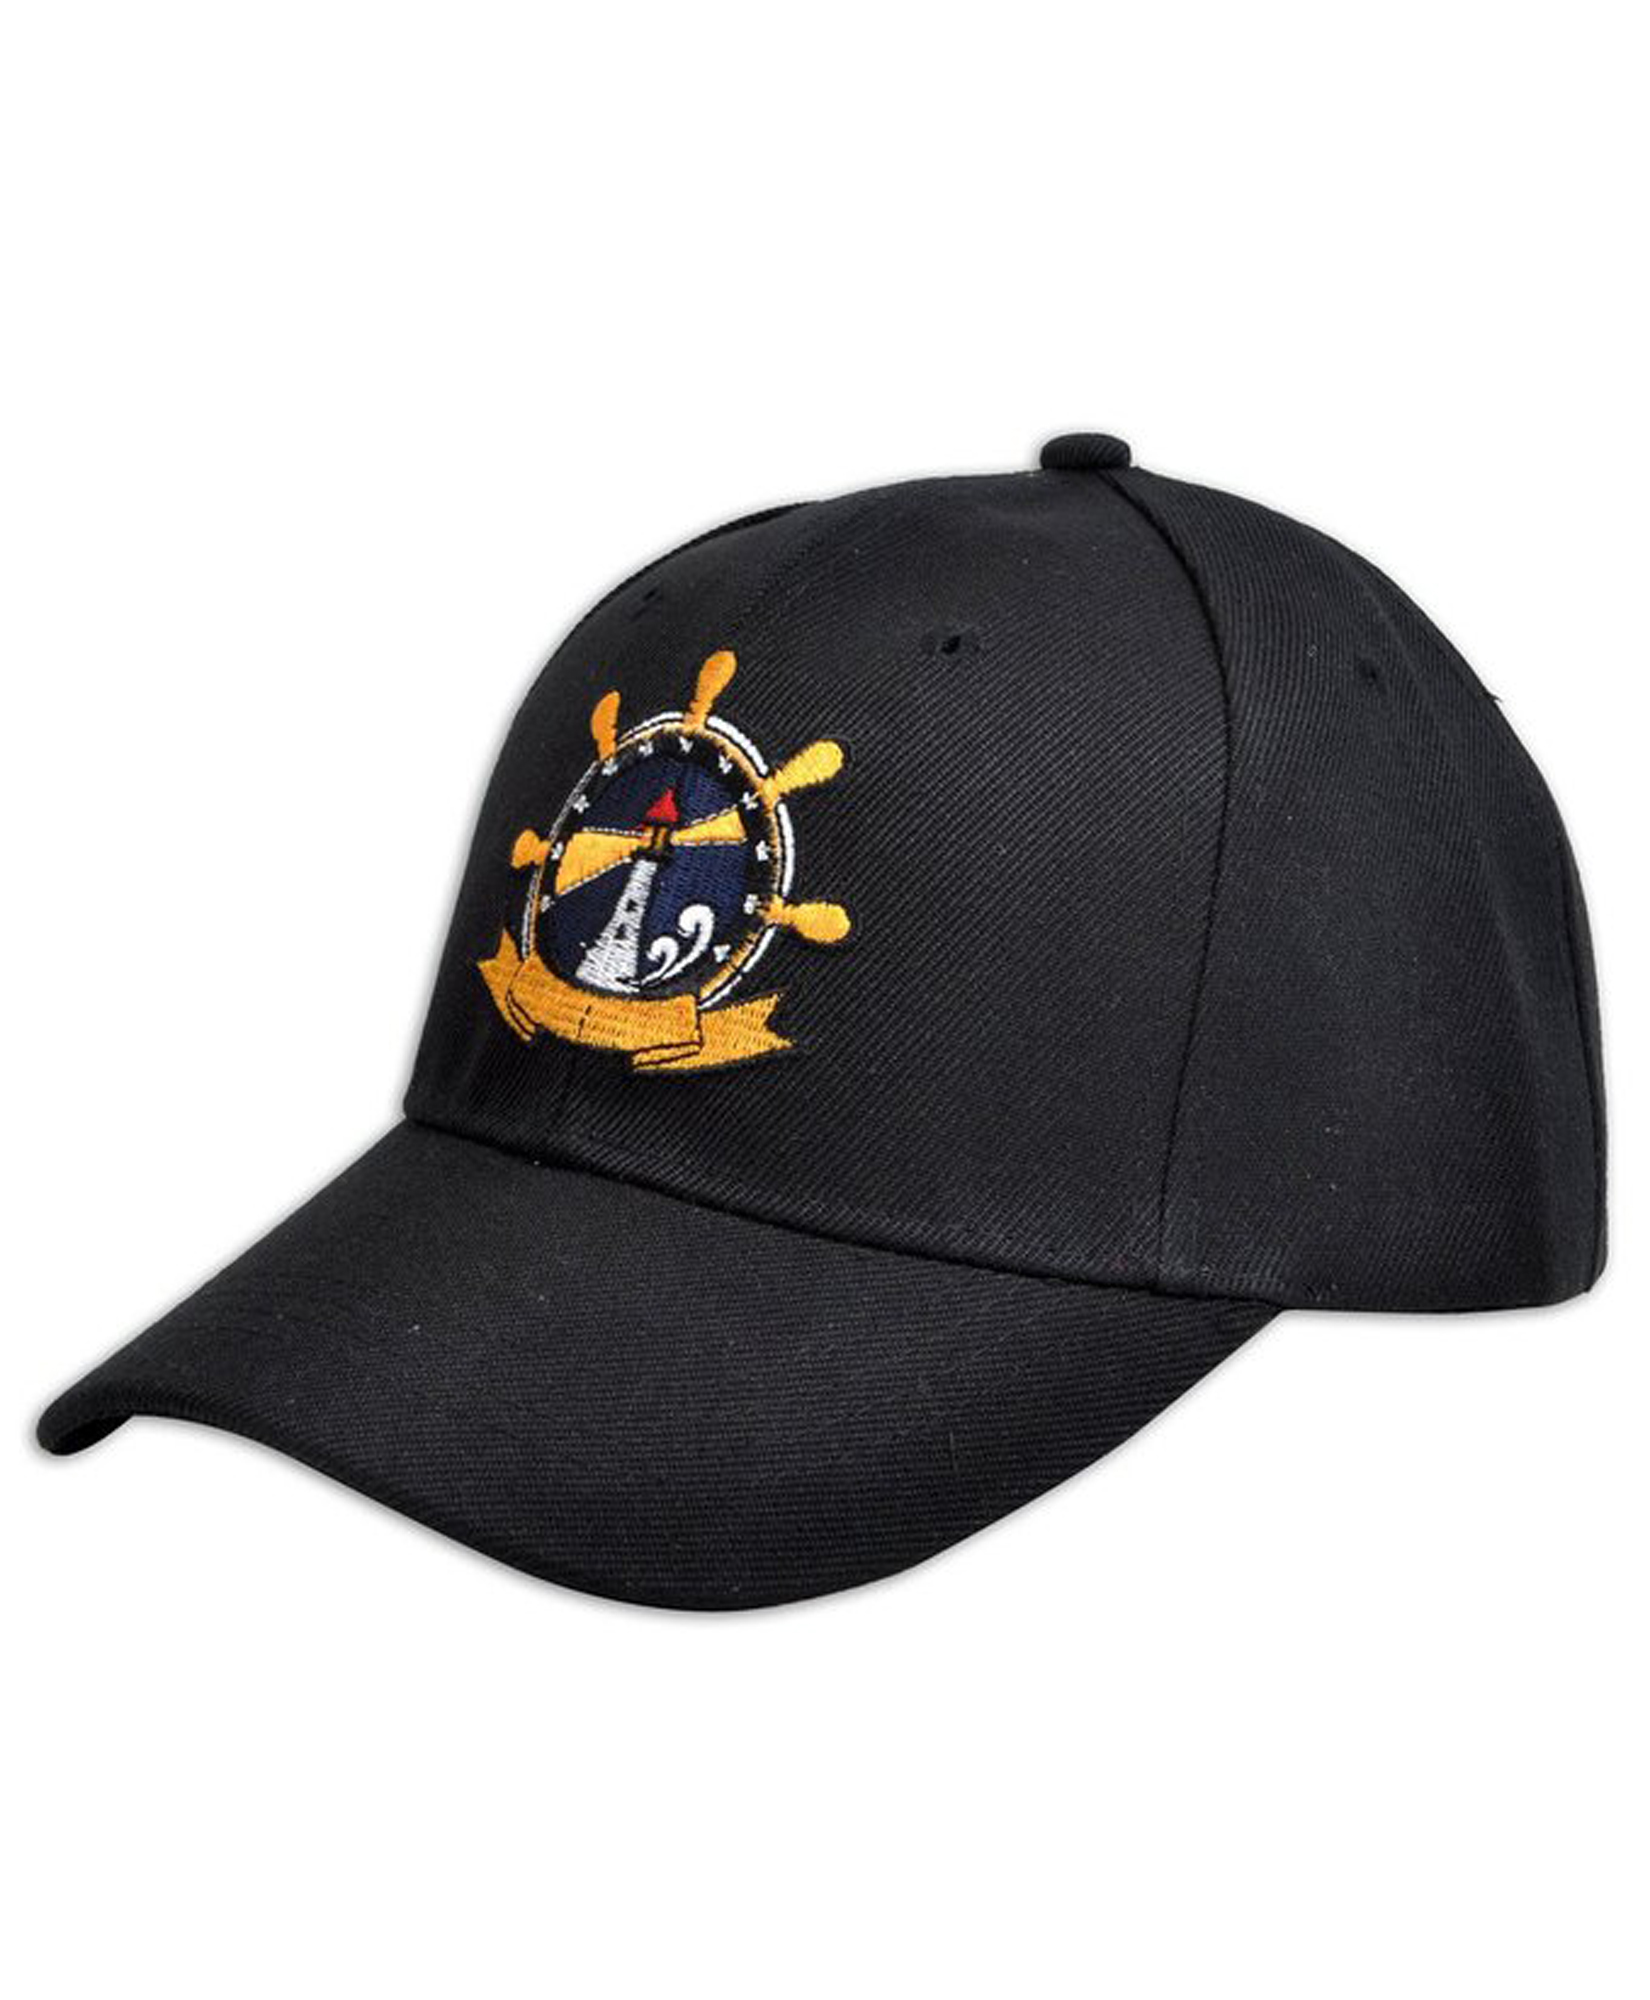 Timon Boat and Lighthouse Adjustable Baseball Cap